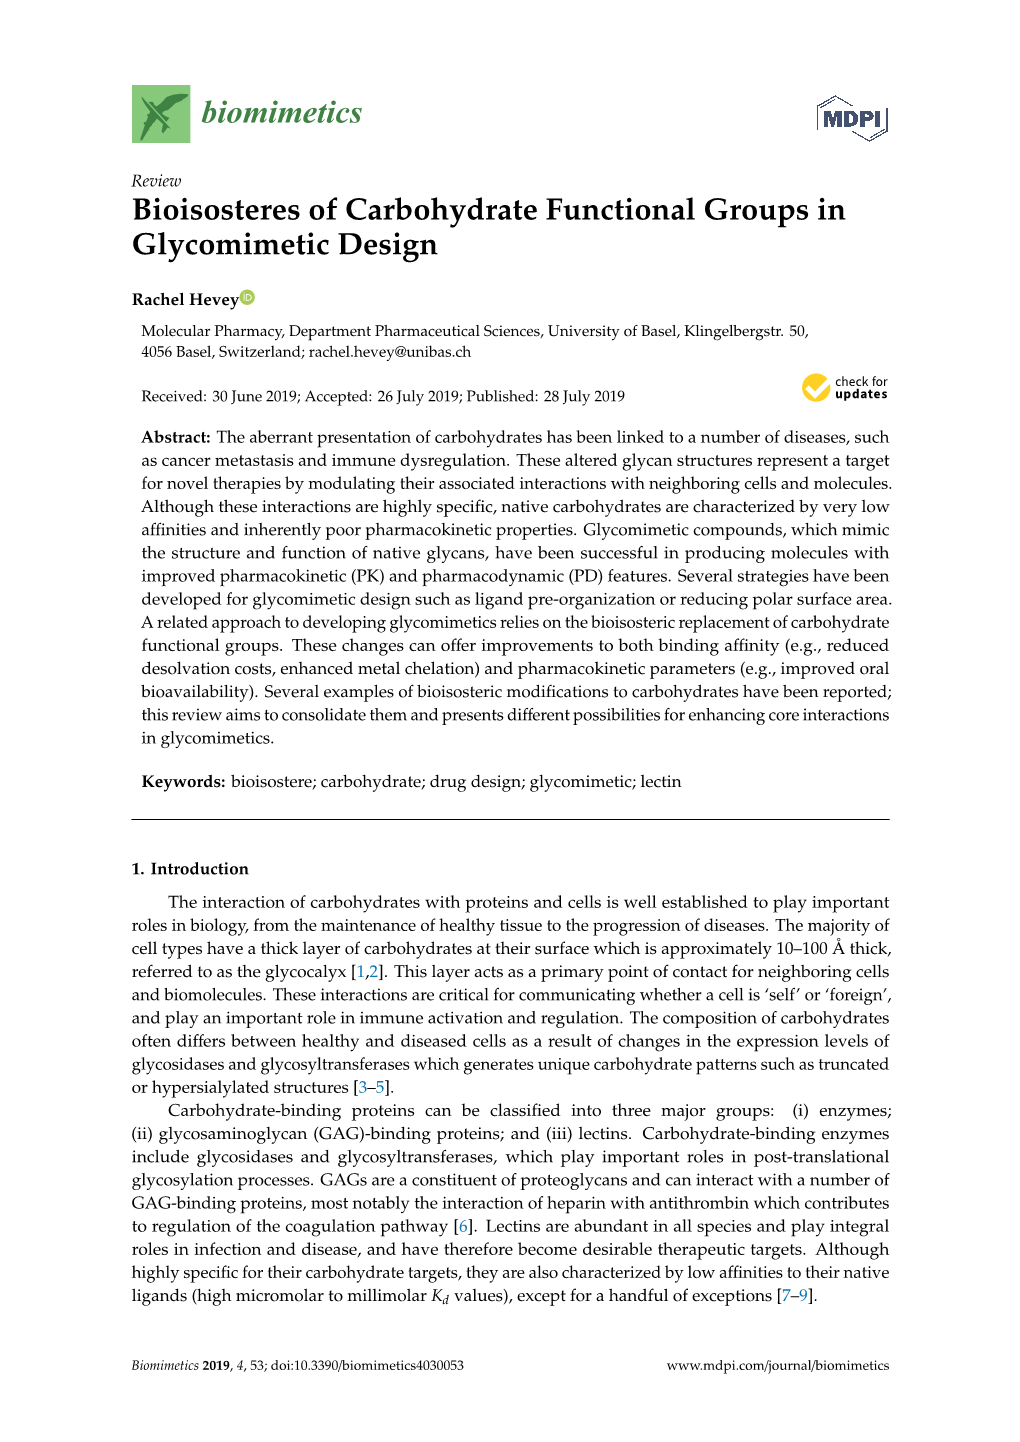 Bioisosteres of Carbohydrate Functional Groups in Glycomimetic Design